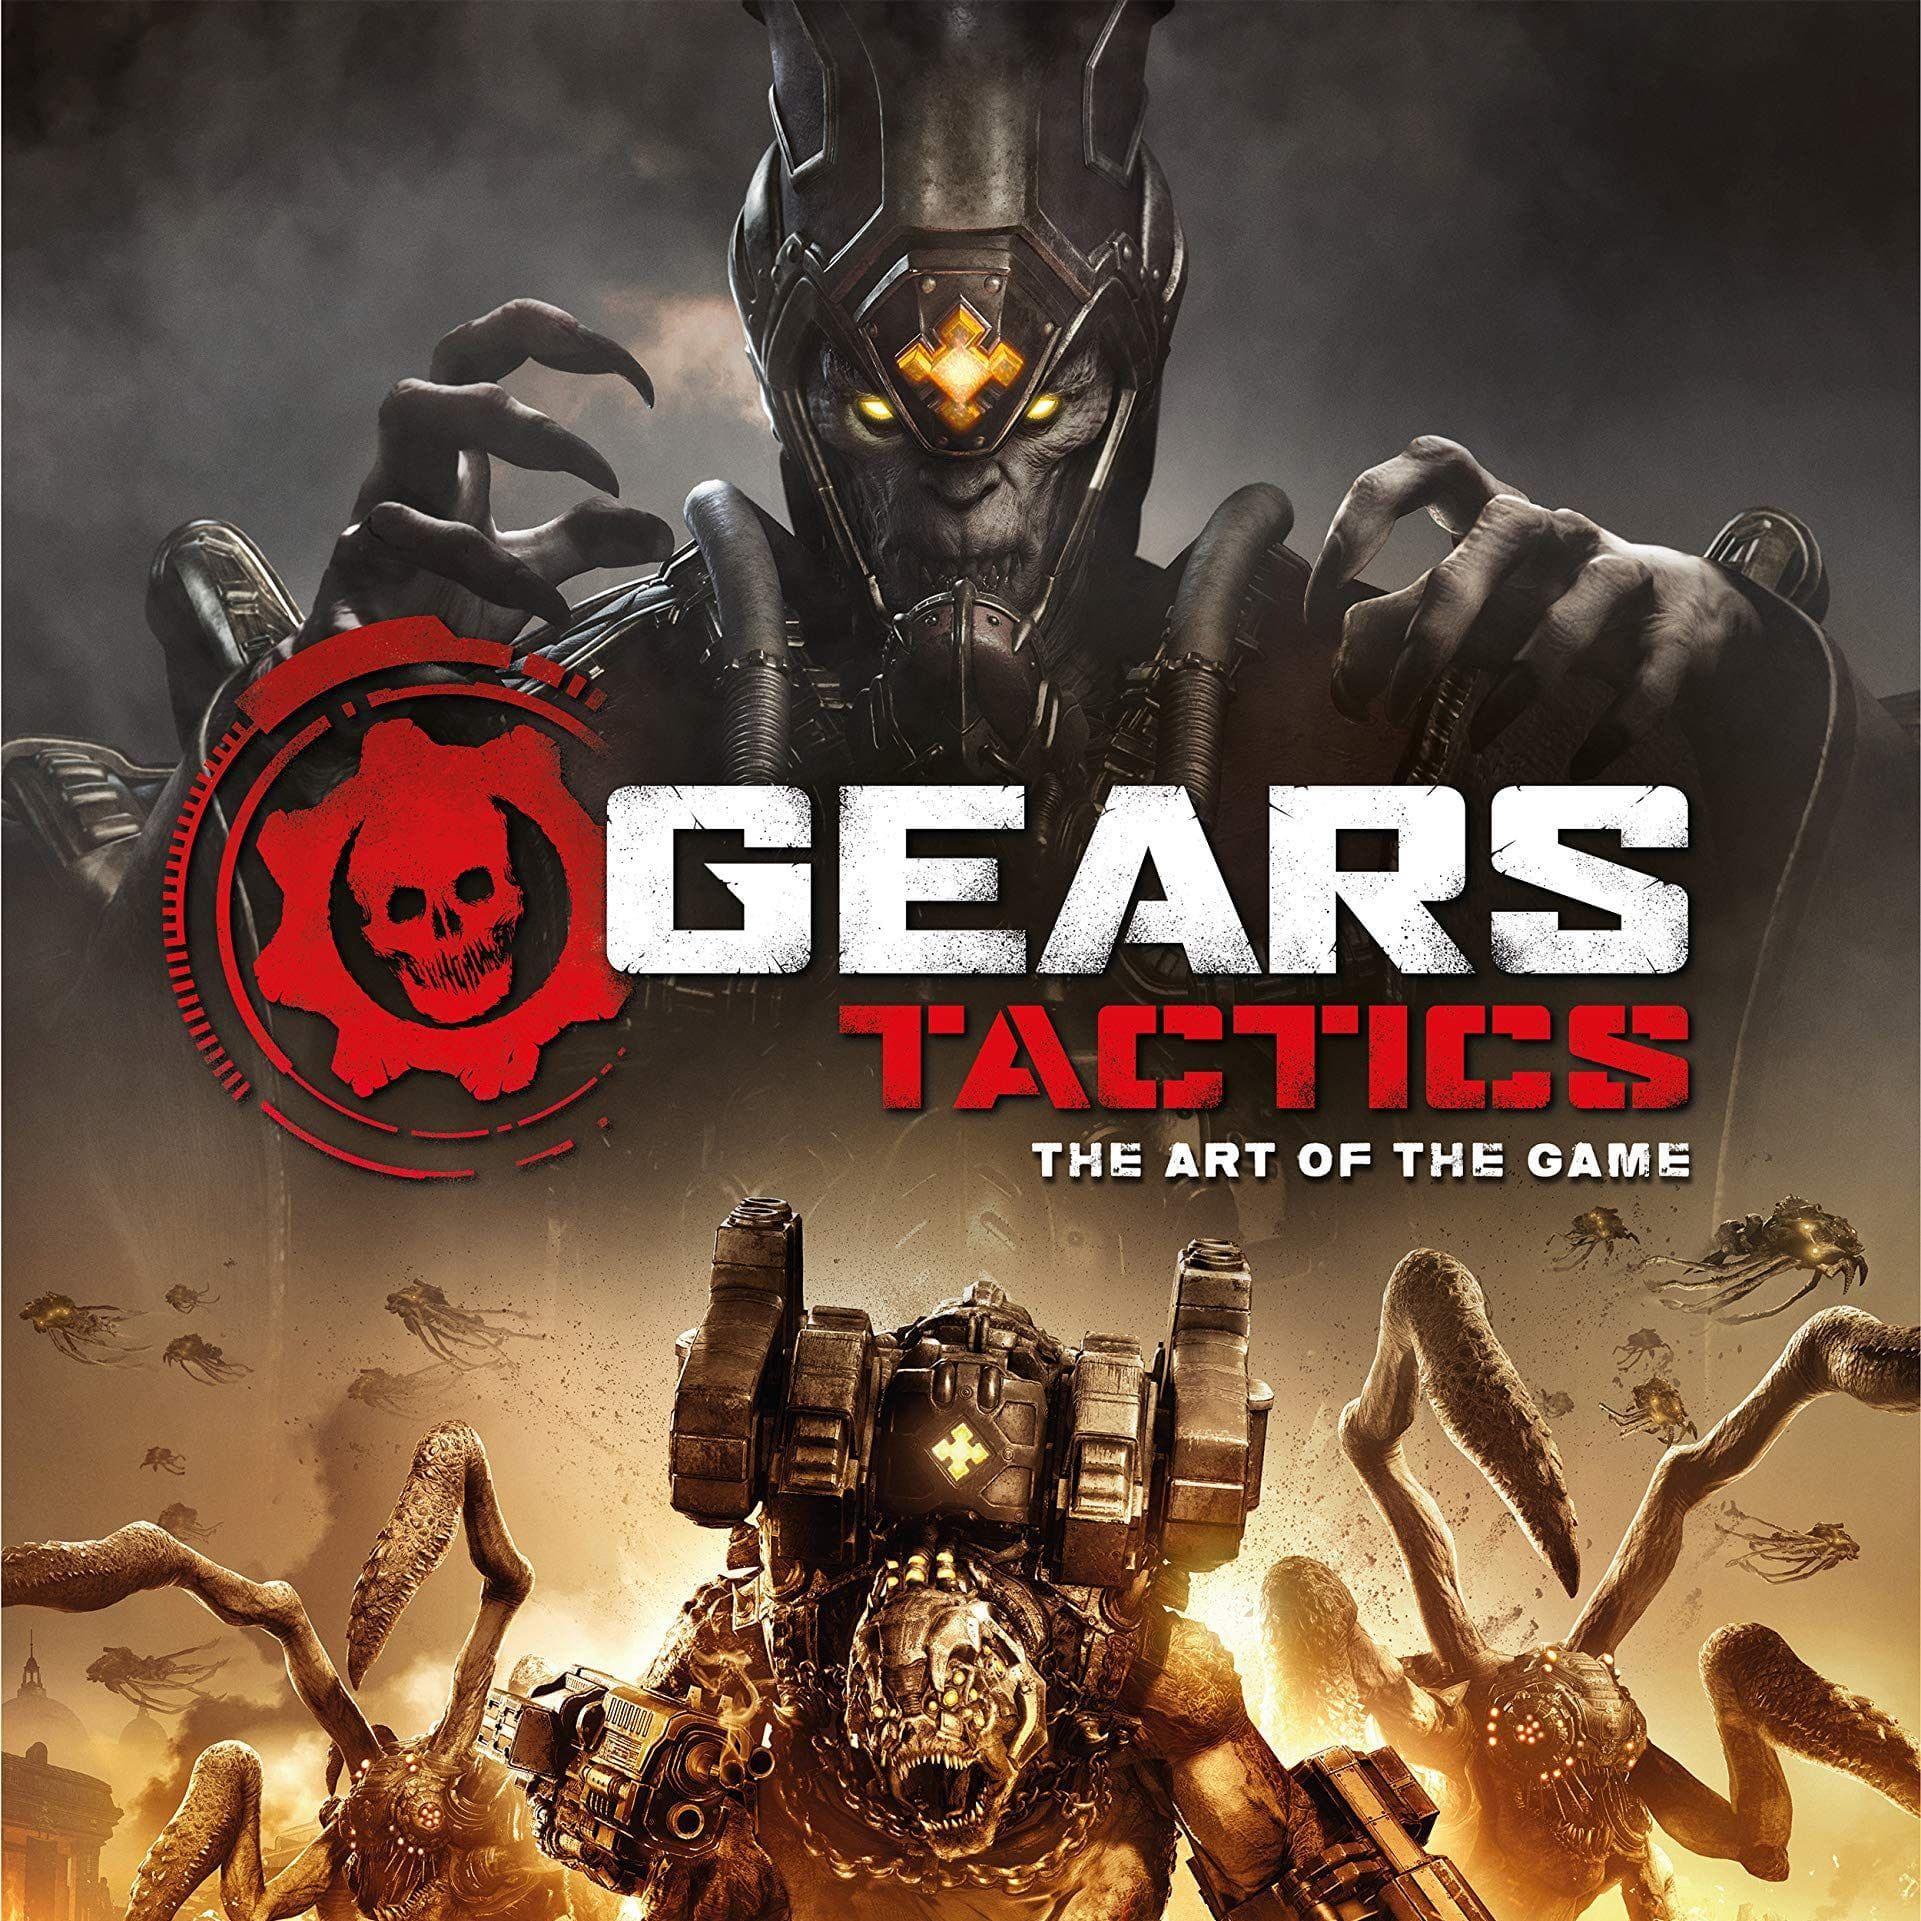 Ranking The Gears Of War Games From Worst To Best